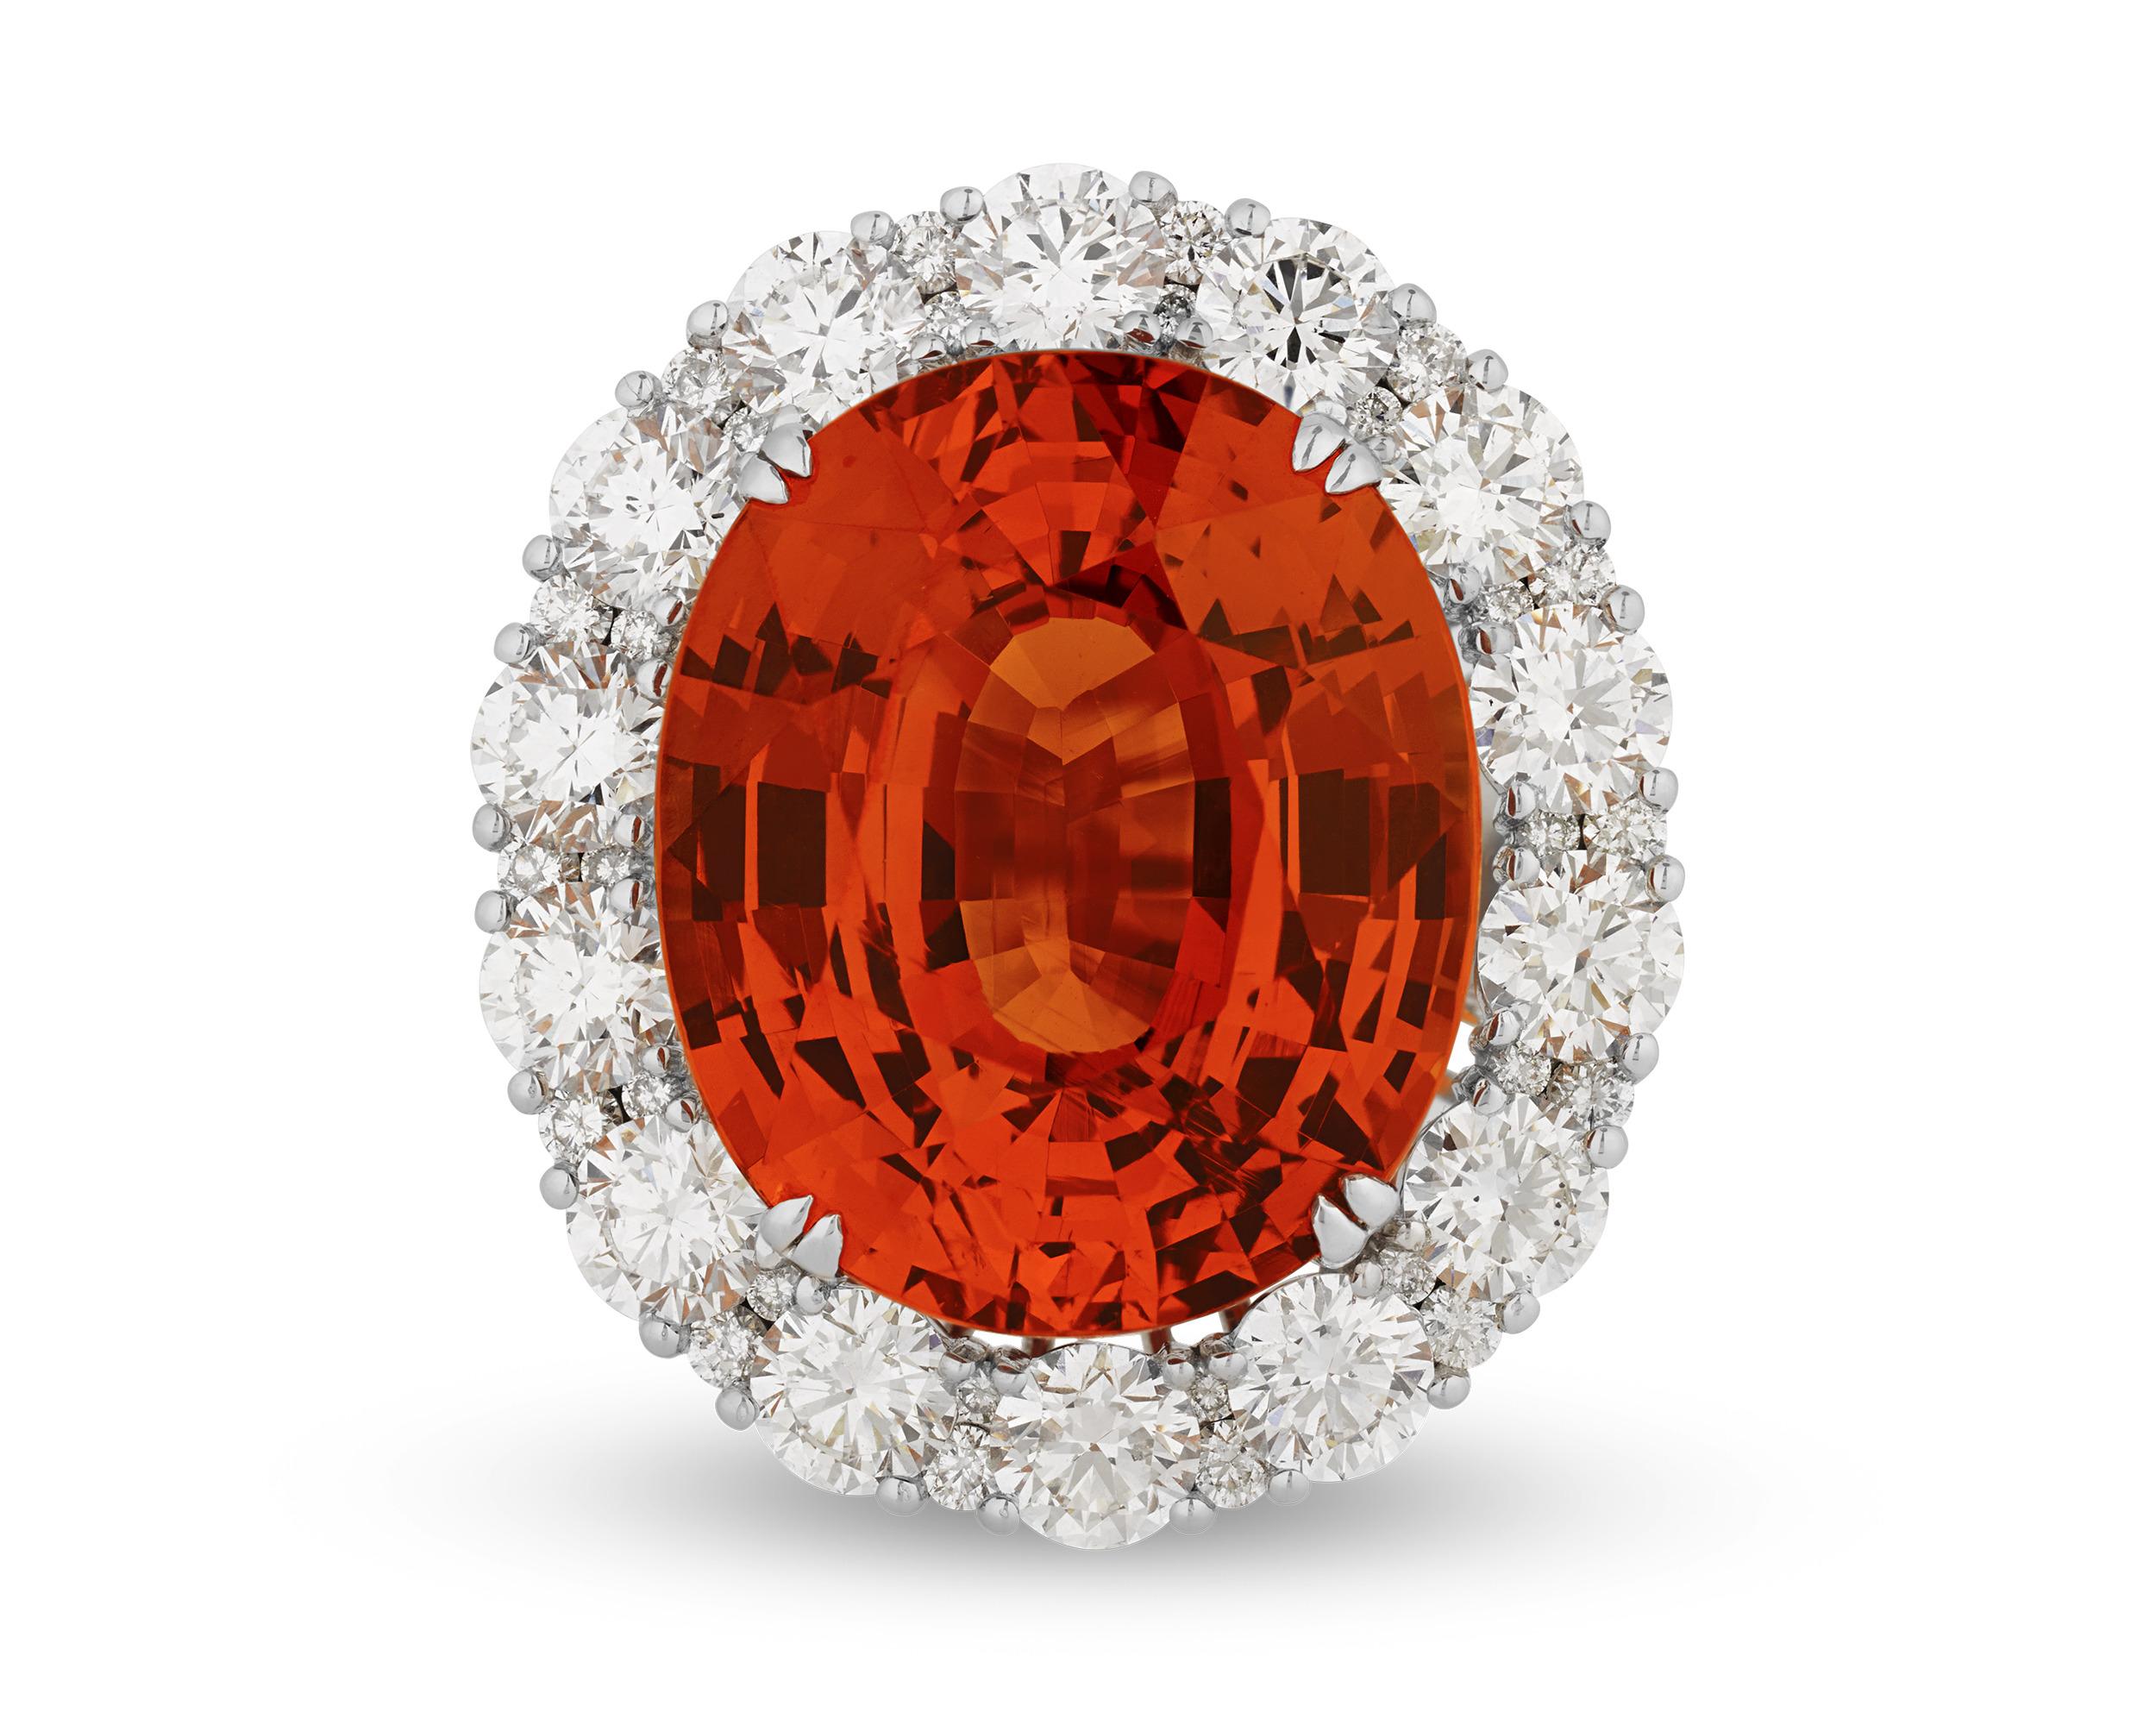 The radiance of the sunset shines from this rare Mandarin garnet. A type of Spessartite garnet, the first Mandarin garnets were discovered in Namibia in 1991, and soon after this unique variety began to garner the attention of the international